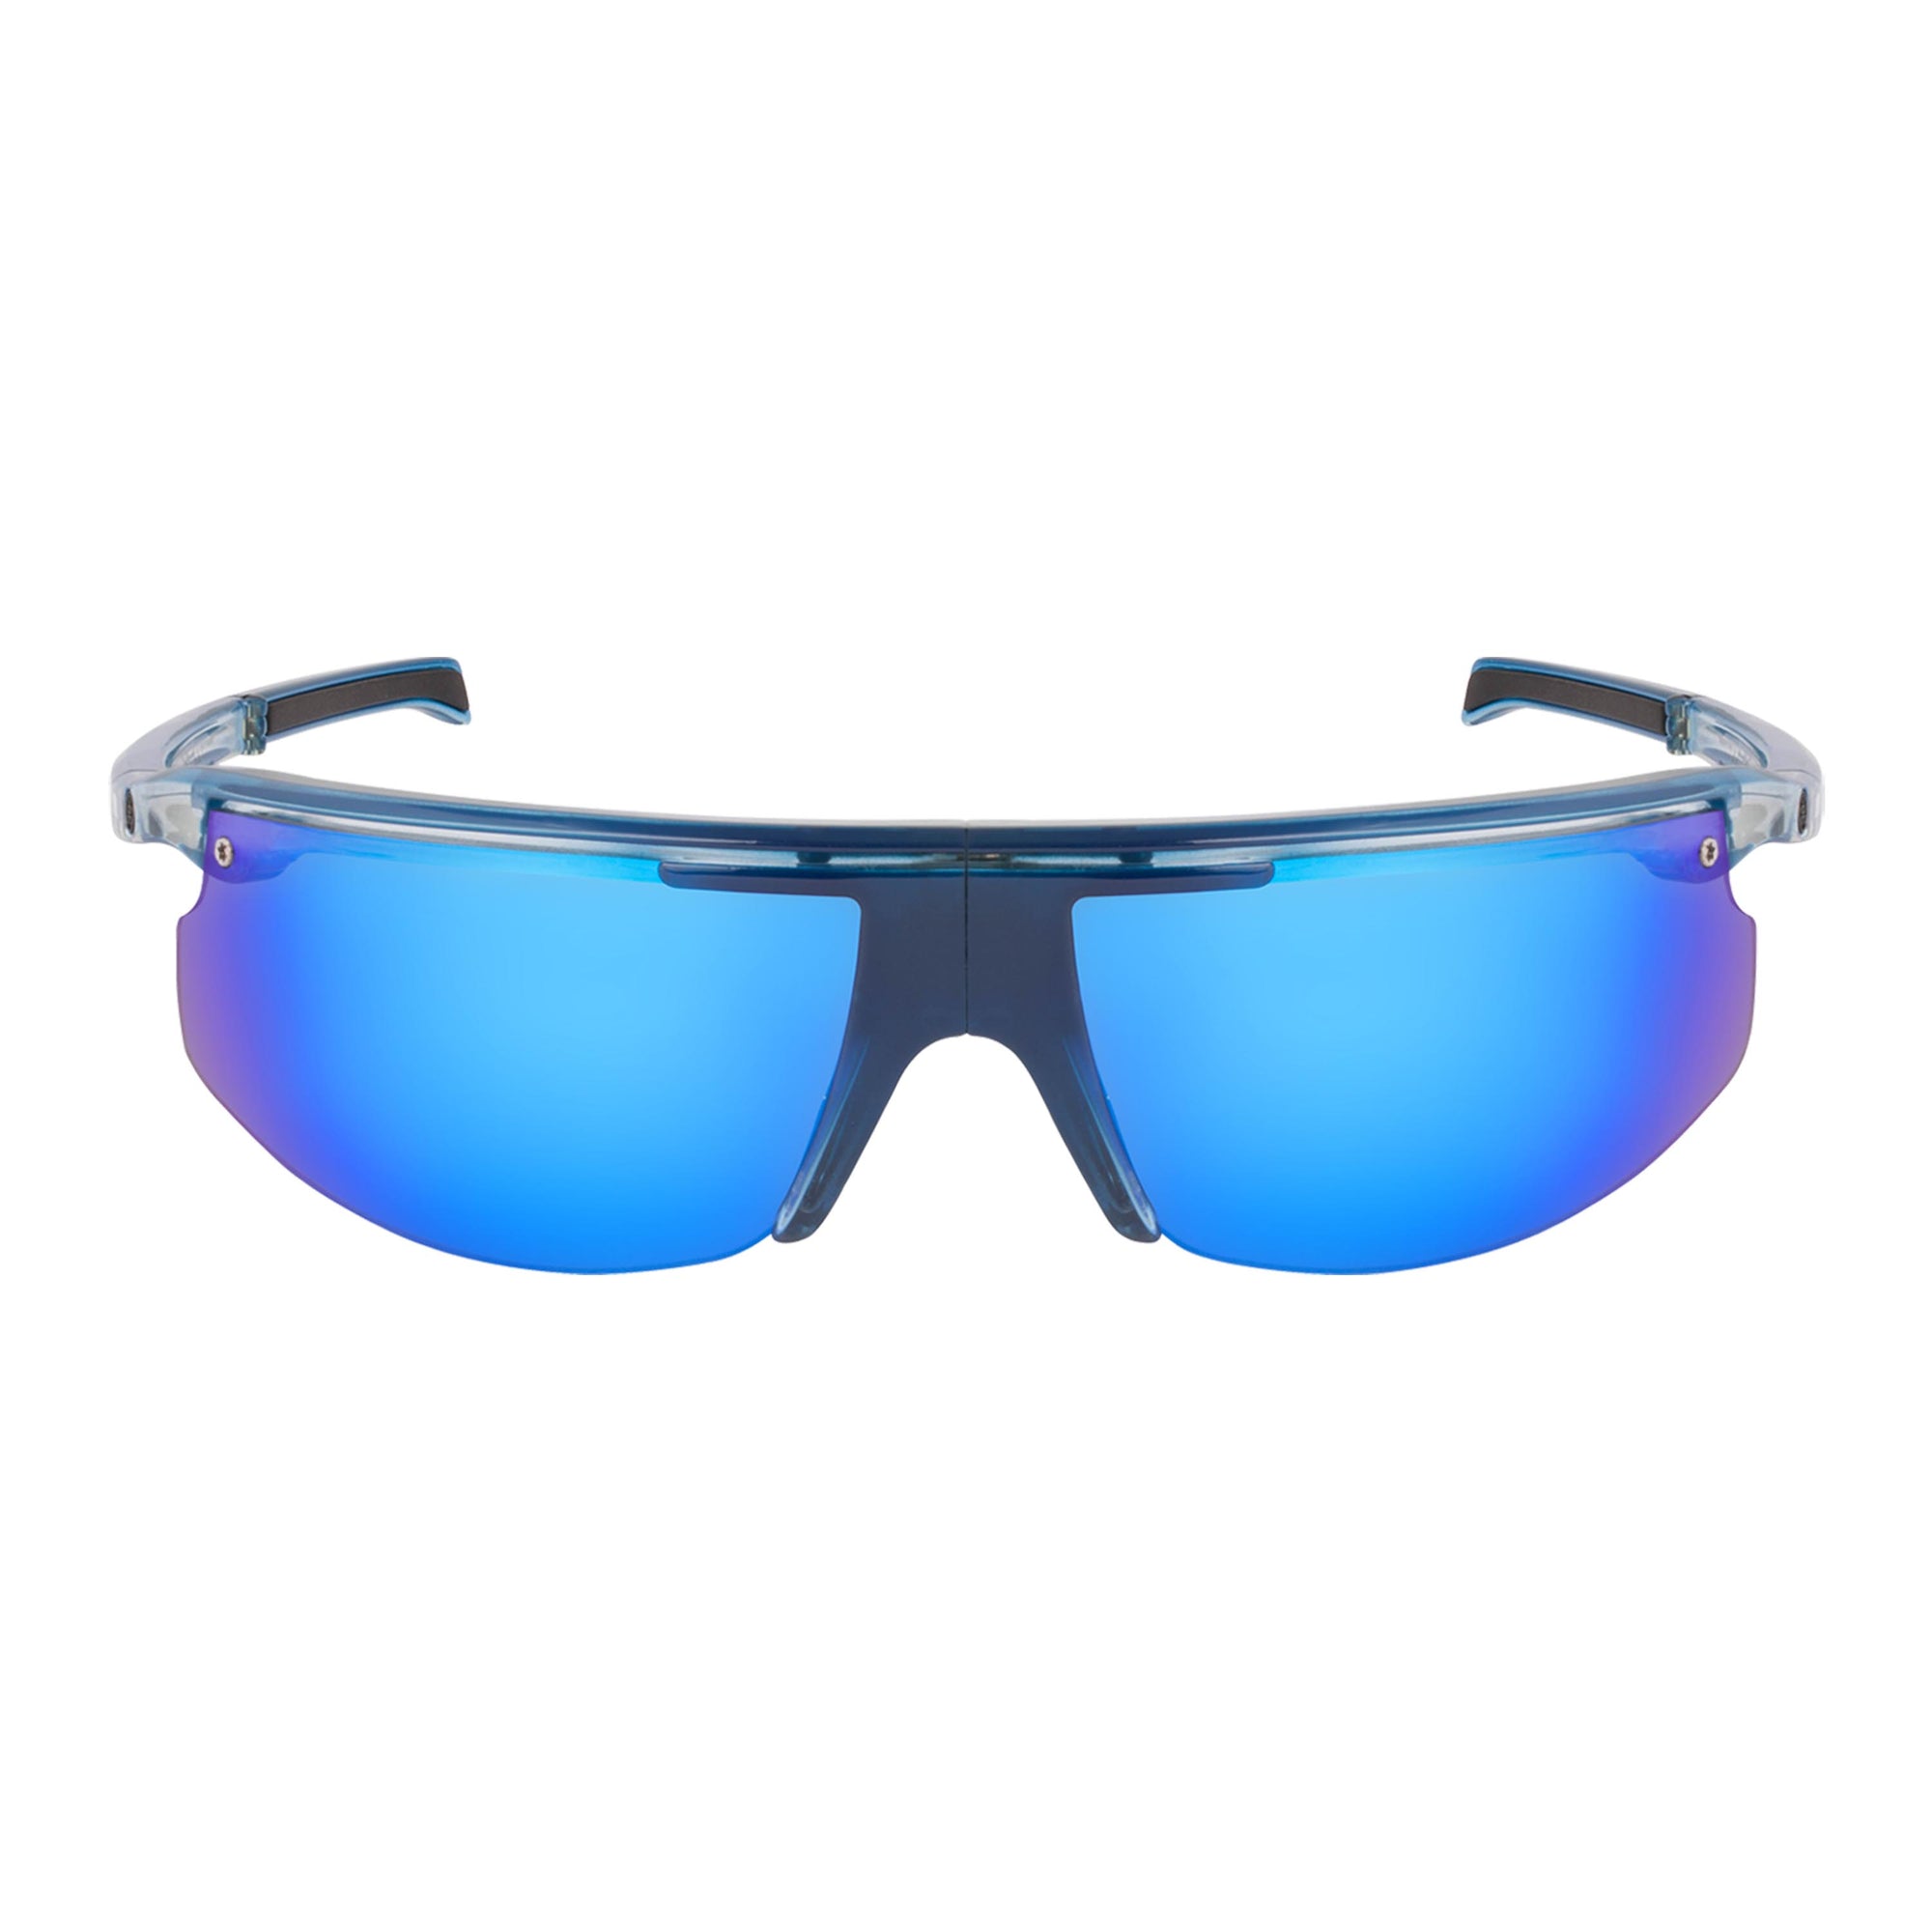 Popticals, Premium Compact Sunglasses, PopStar, 030040-BFUN, Polarized Sunglasses, Gloss Blue/Clear Crystal Frame, Gray Lenses w/Blue Mirror Finish, Small, Front View